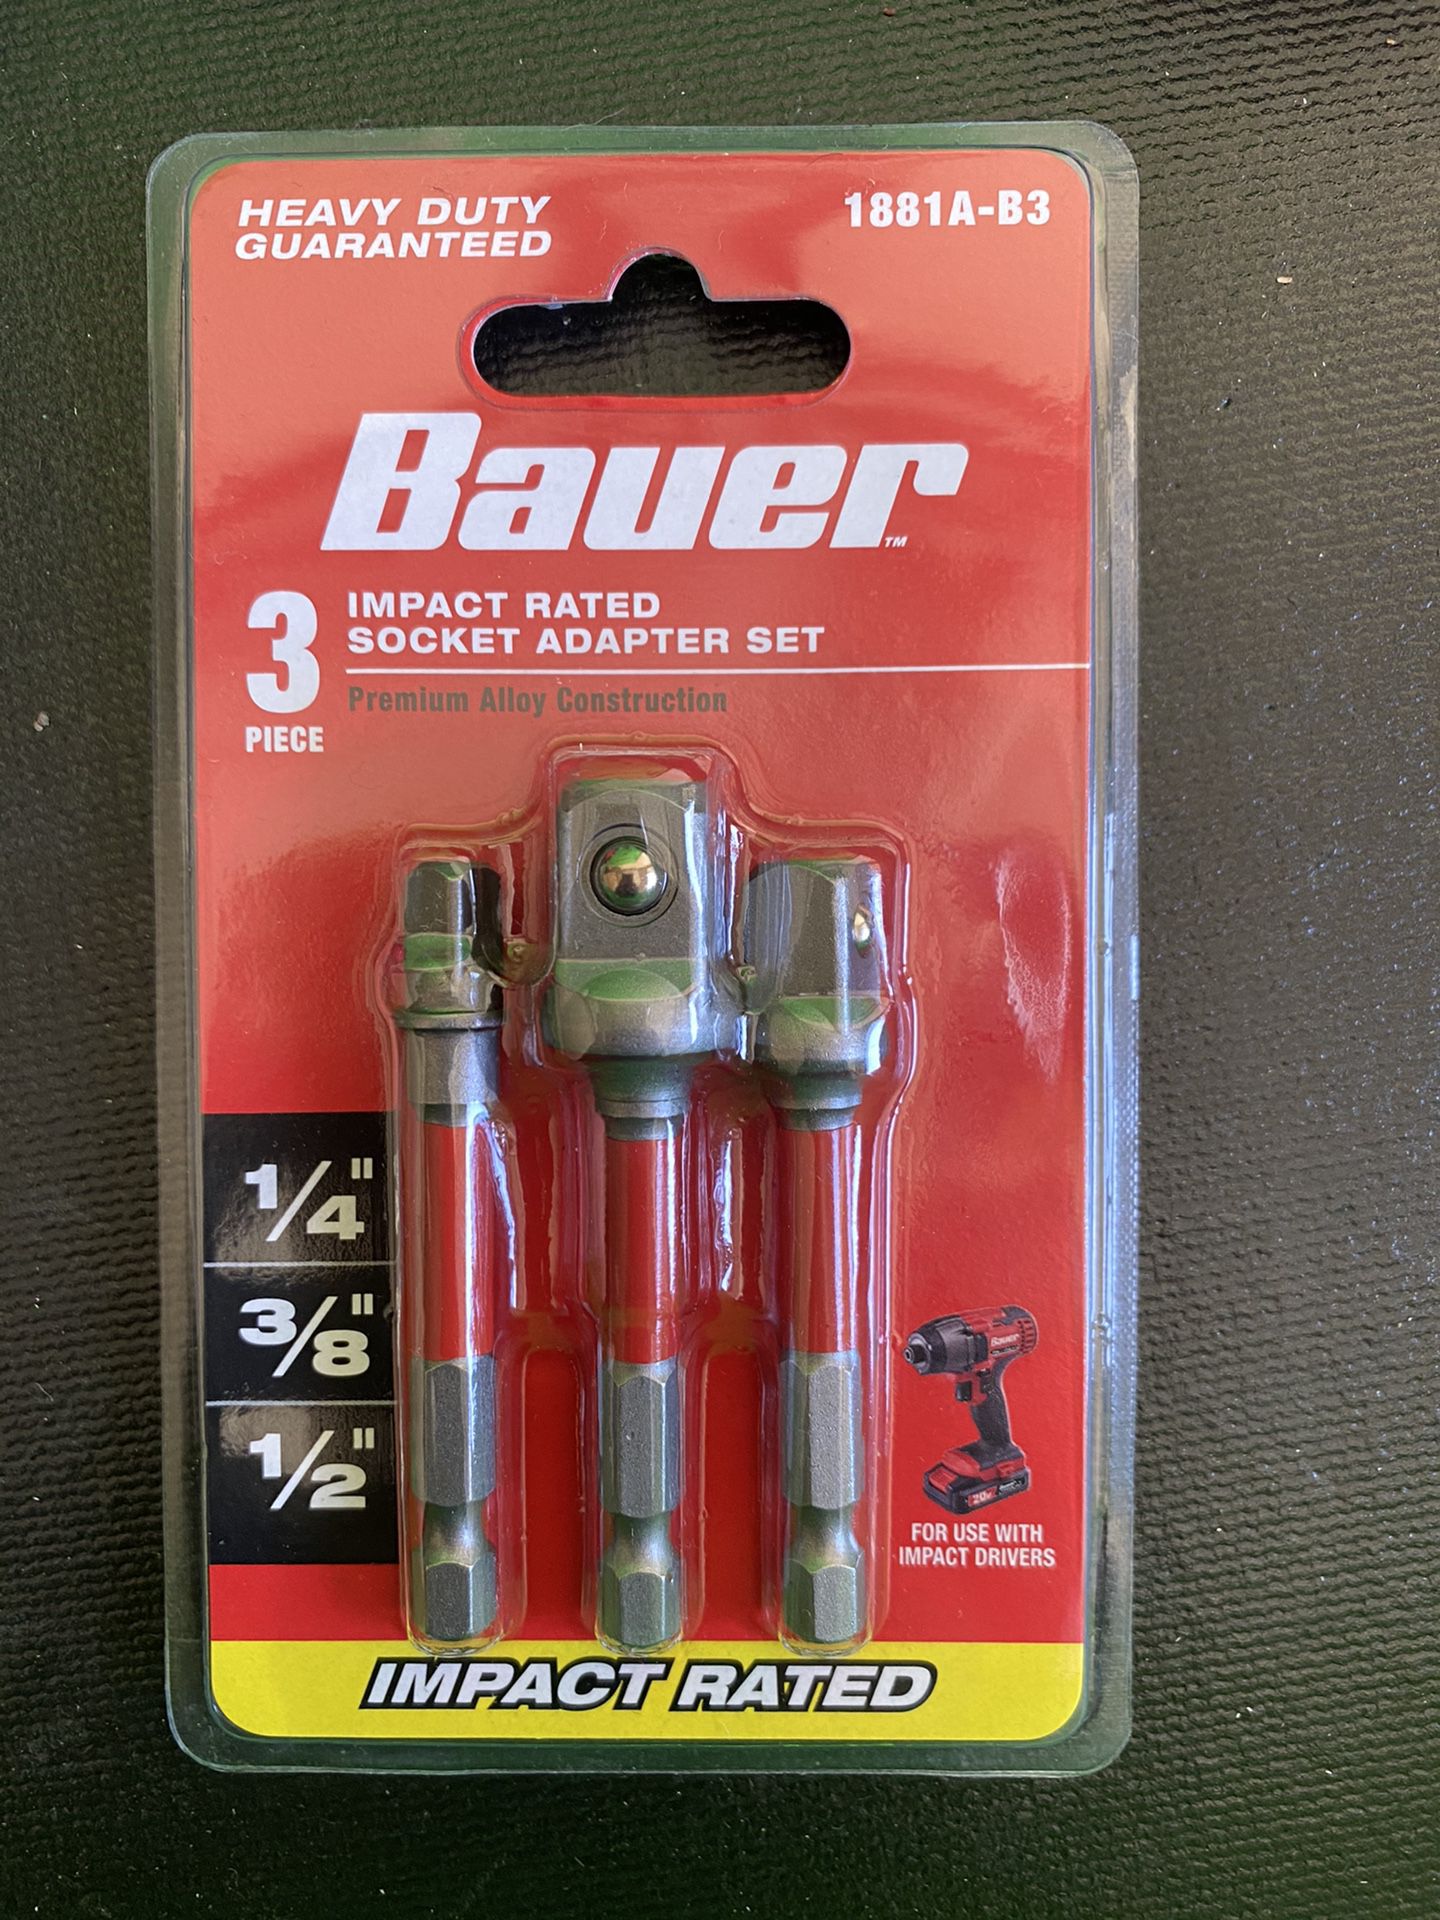 Bauer impact rated socket adapter set